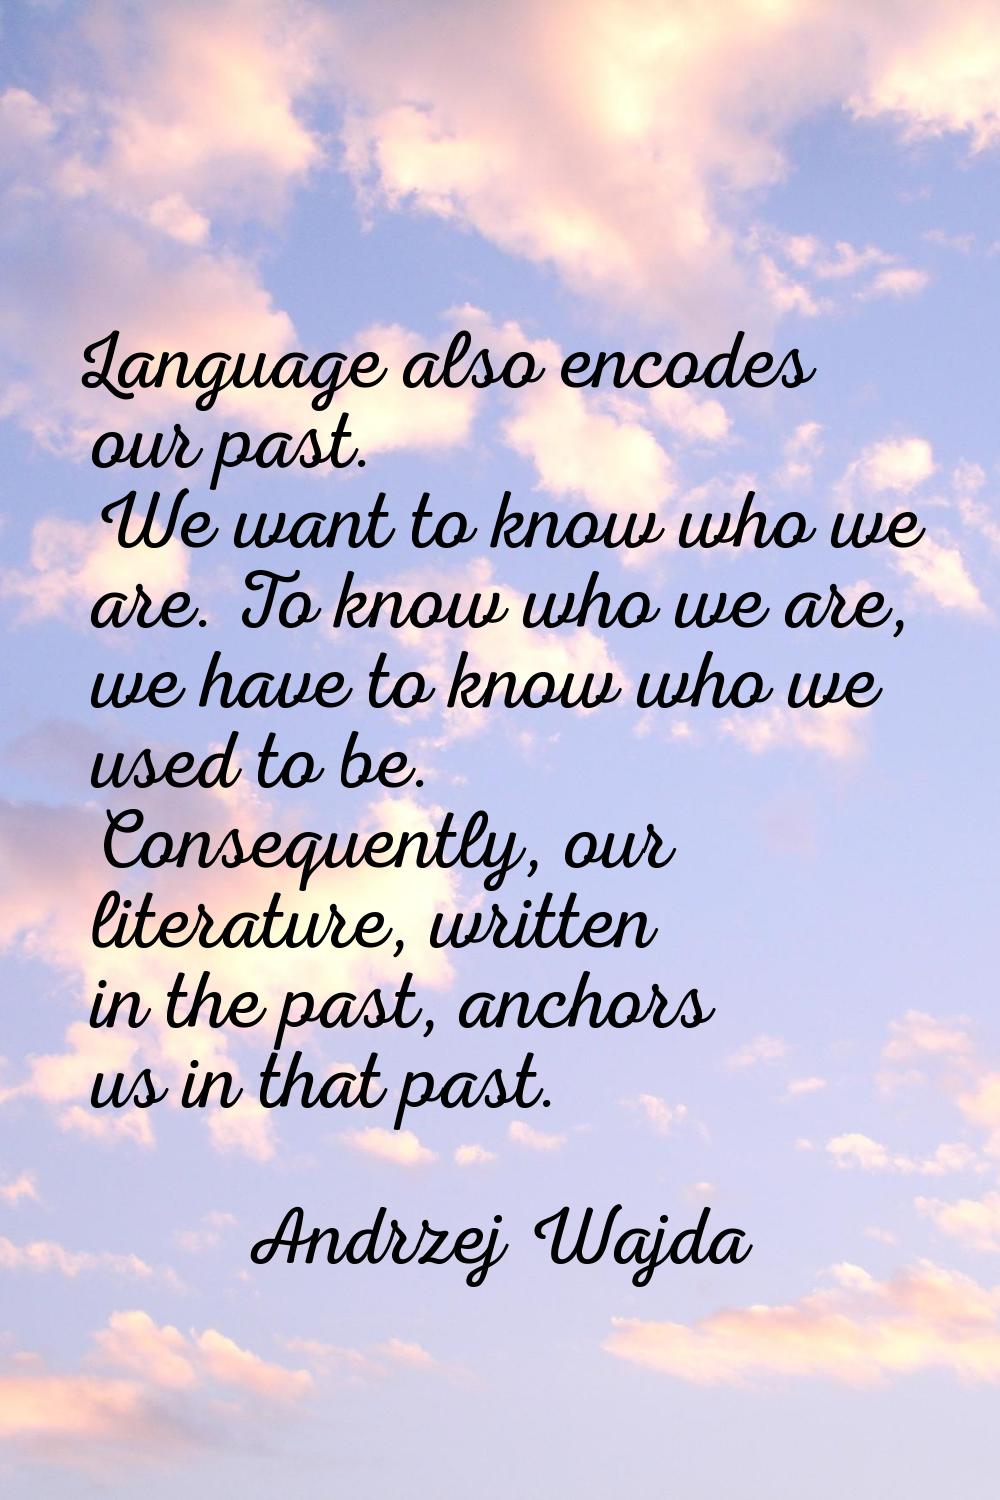 Language also encodes our past. We want to know who we are. To know who we are, we have to know who